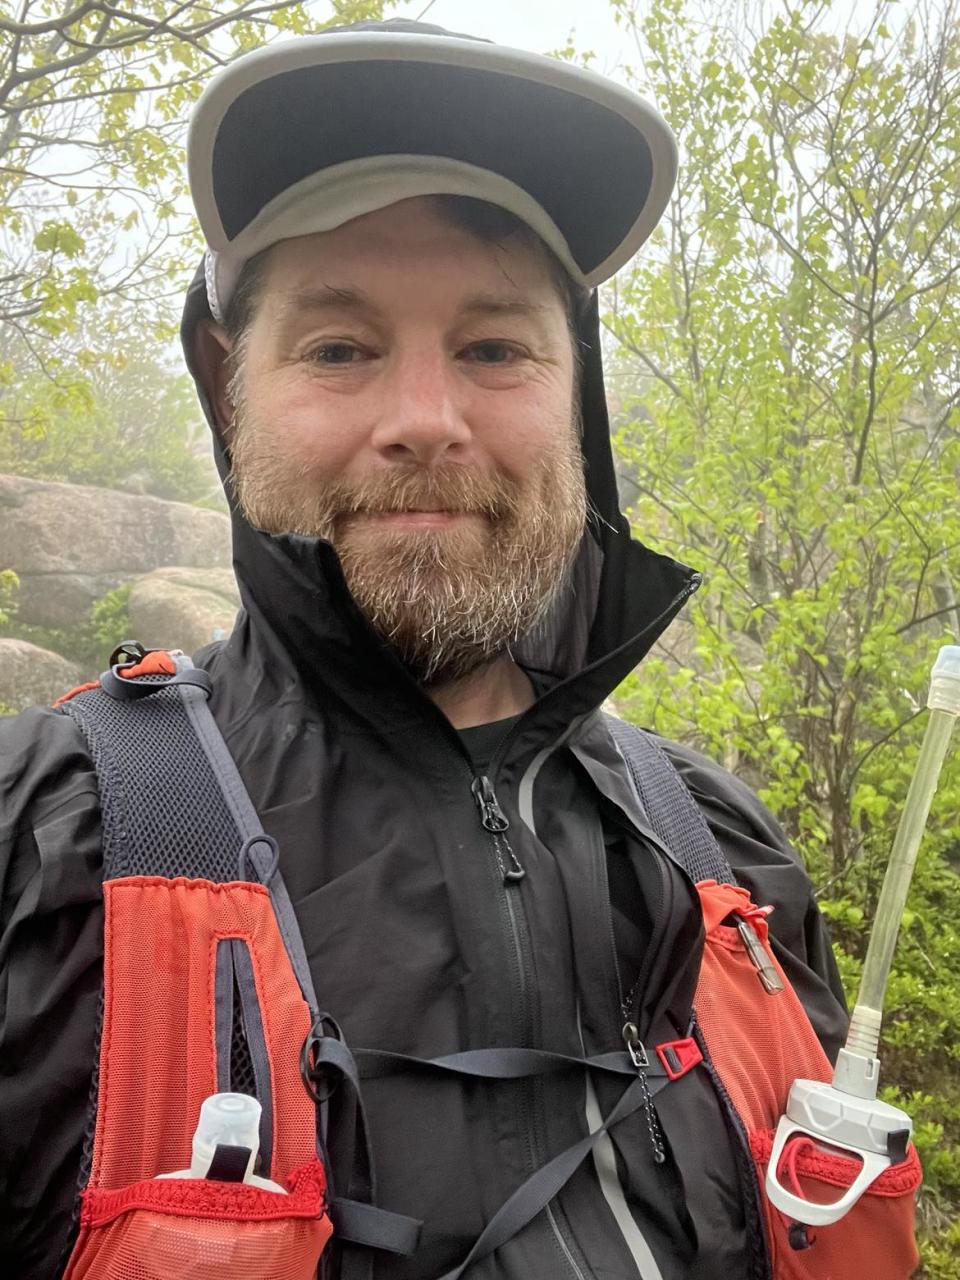 Mark McColgan is Race Director part of organizing the Rompin' Rockwood Trail Race, and says he is grateful that Kerr and others stepped up to save the person in need.